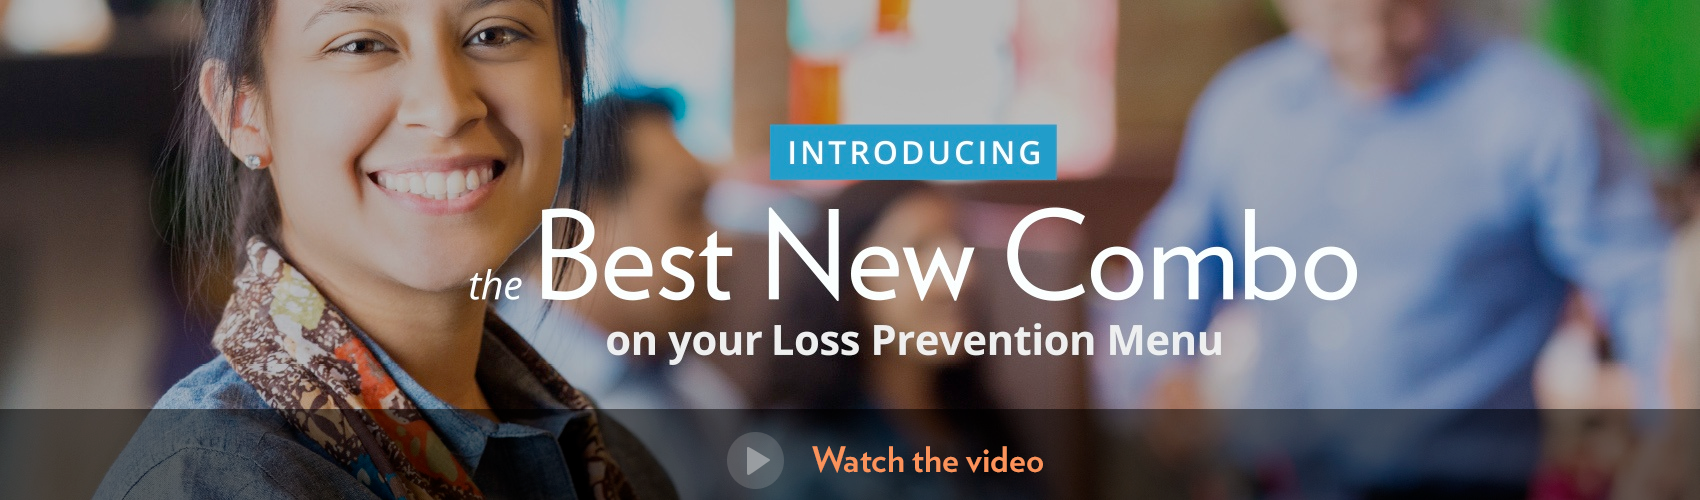 Introducing the best new combo on your loss prevention menu. Click to watch the video.